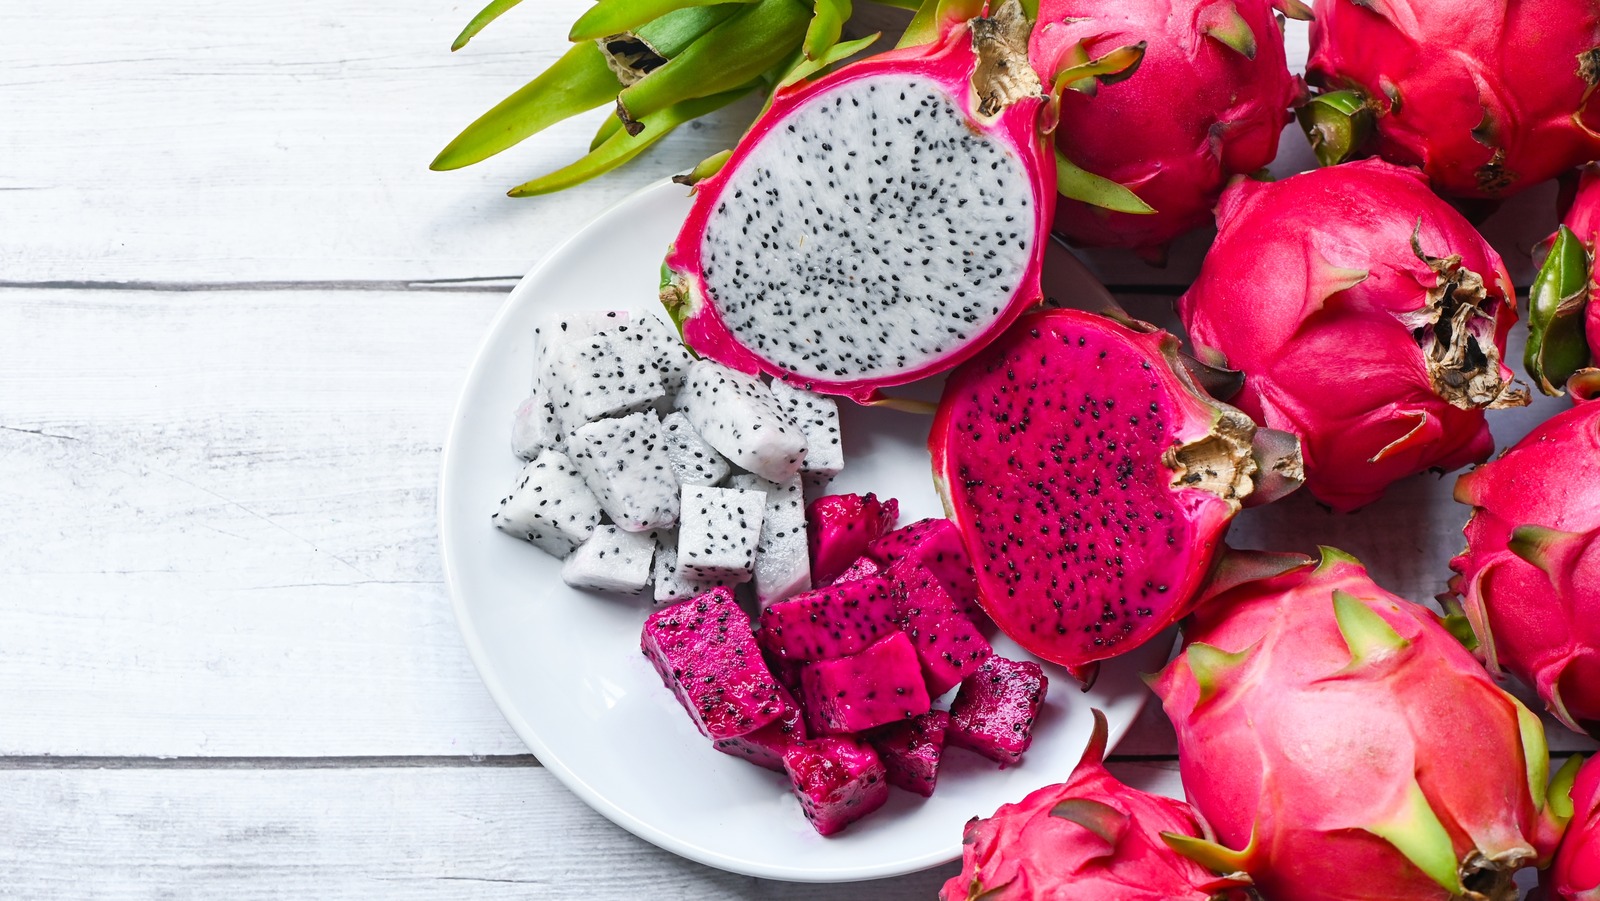 How To Eat Dragon Fruit And Bring Out Its Flavors